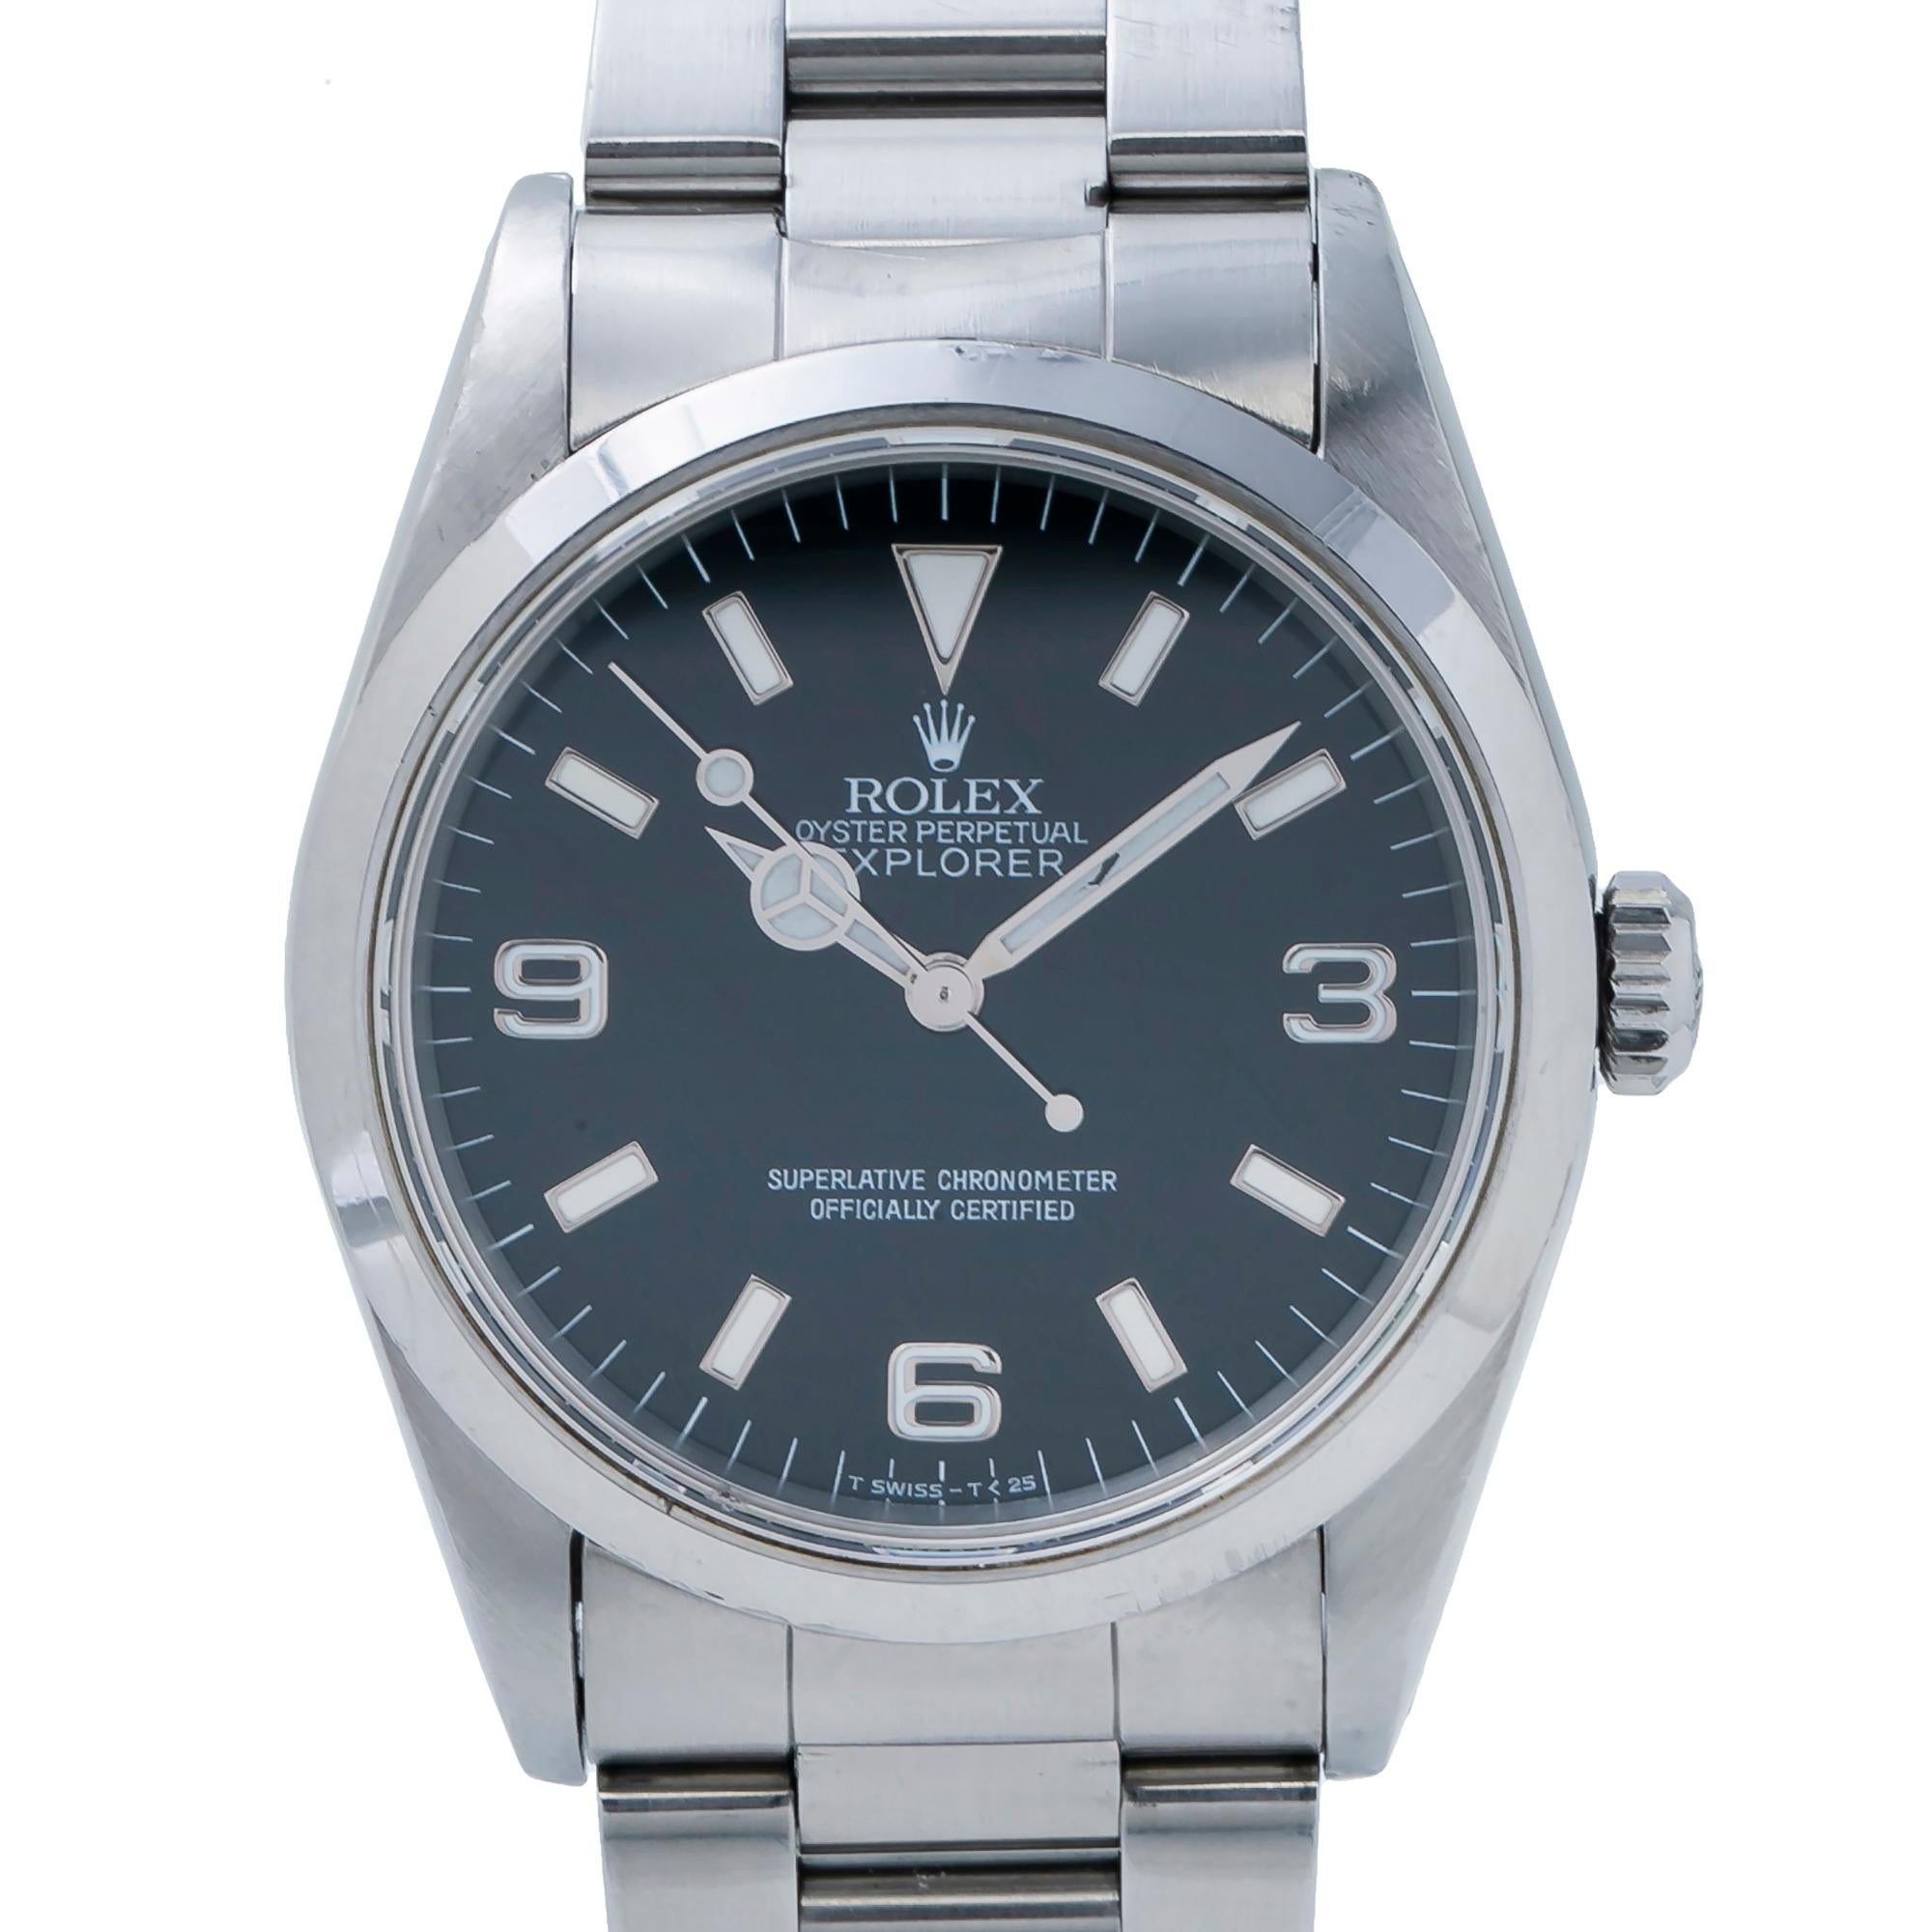 Rolex Explorer 1 14270 Unpolished S Serial Stainless Automatic Men's Watch 36mm